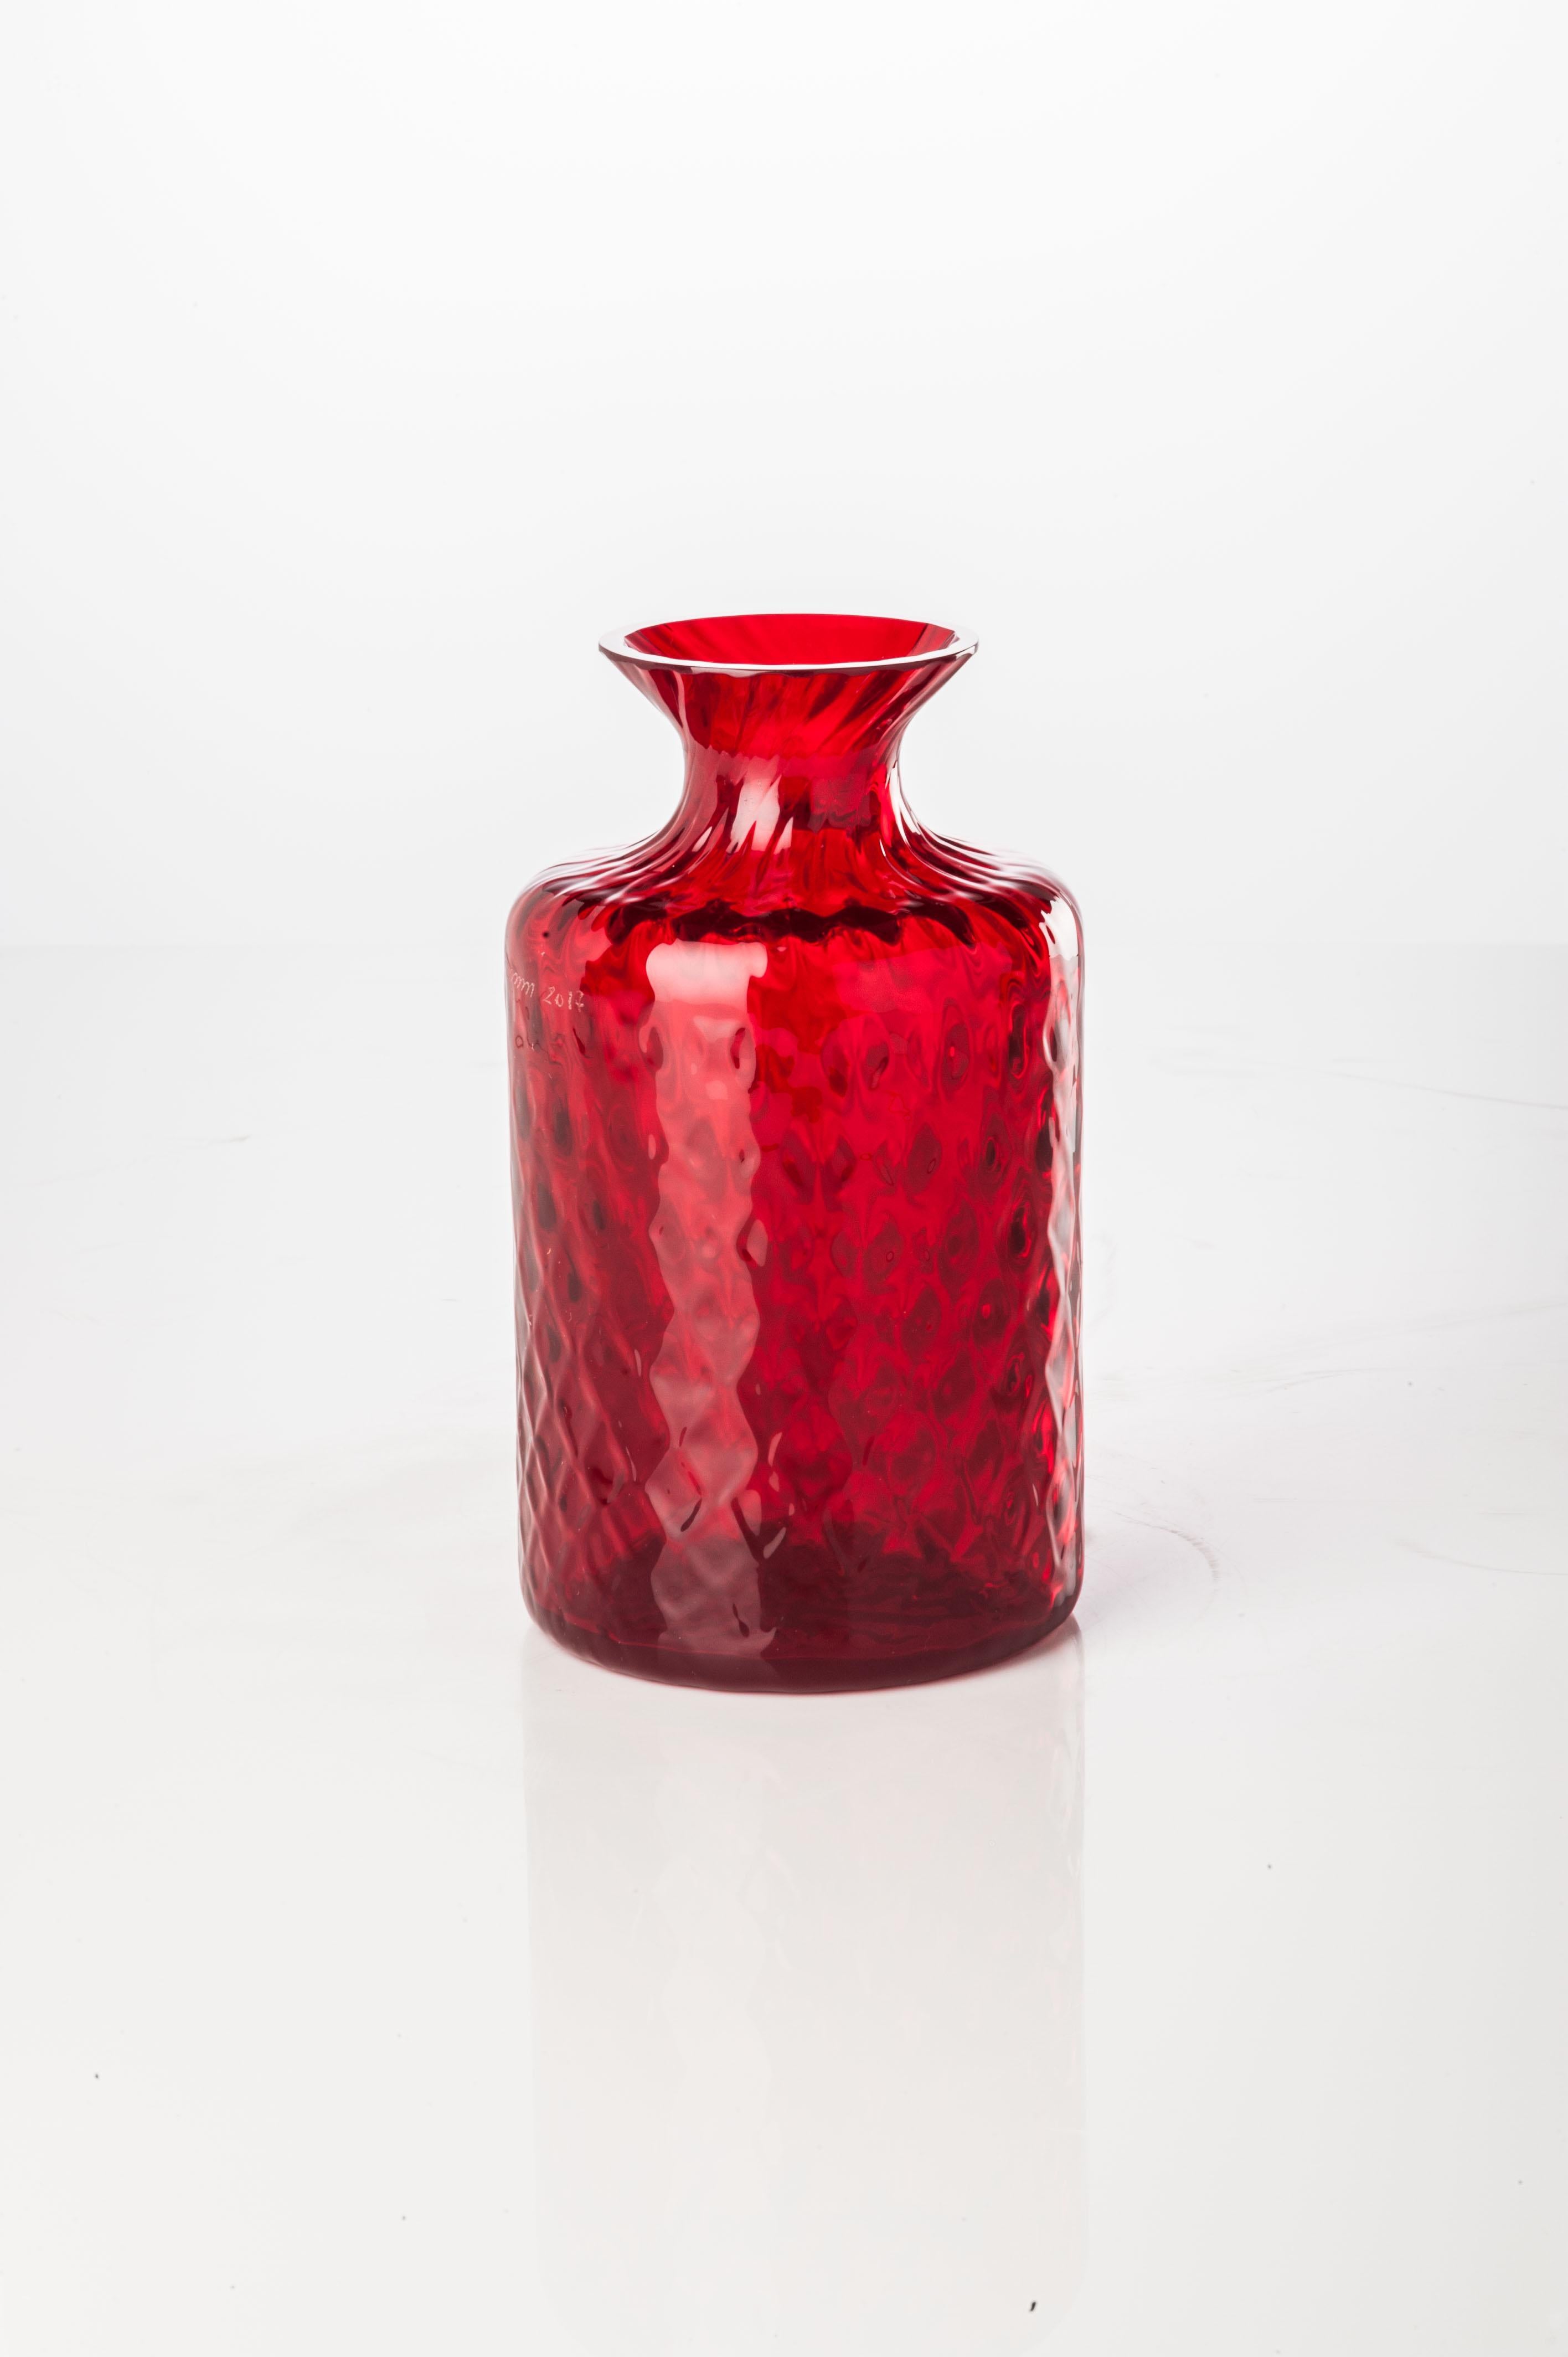 Monofiore Carnevale glass vase collection, designed and manufactured by Venini, features two different shaped vases. Indoor use only. 

Dimensions: Ø 9 cm, H 16 cm.